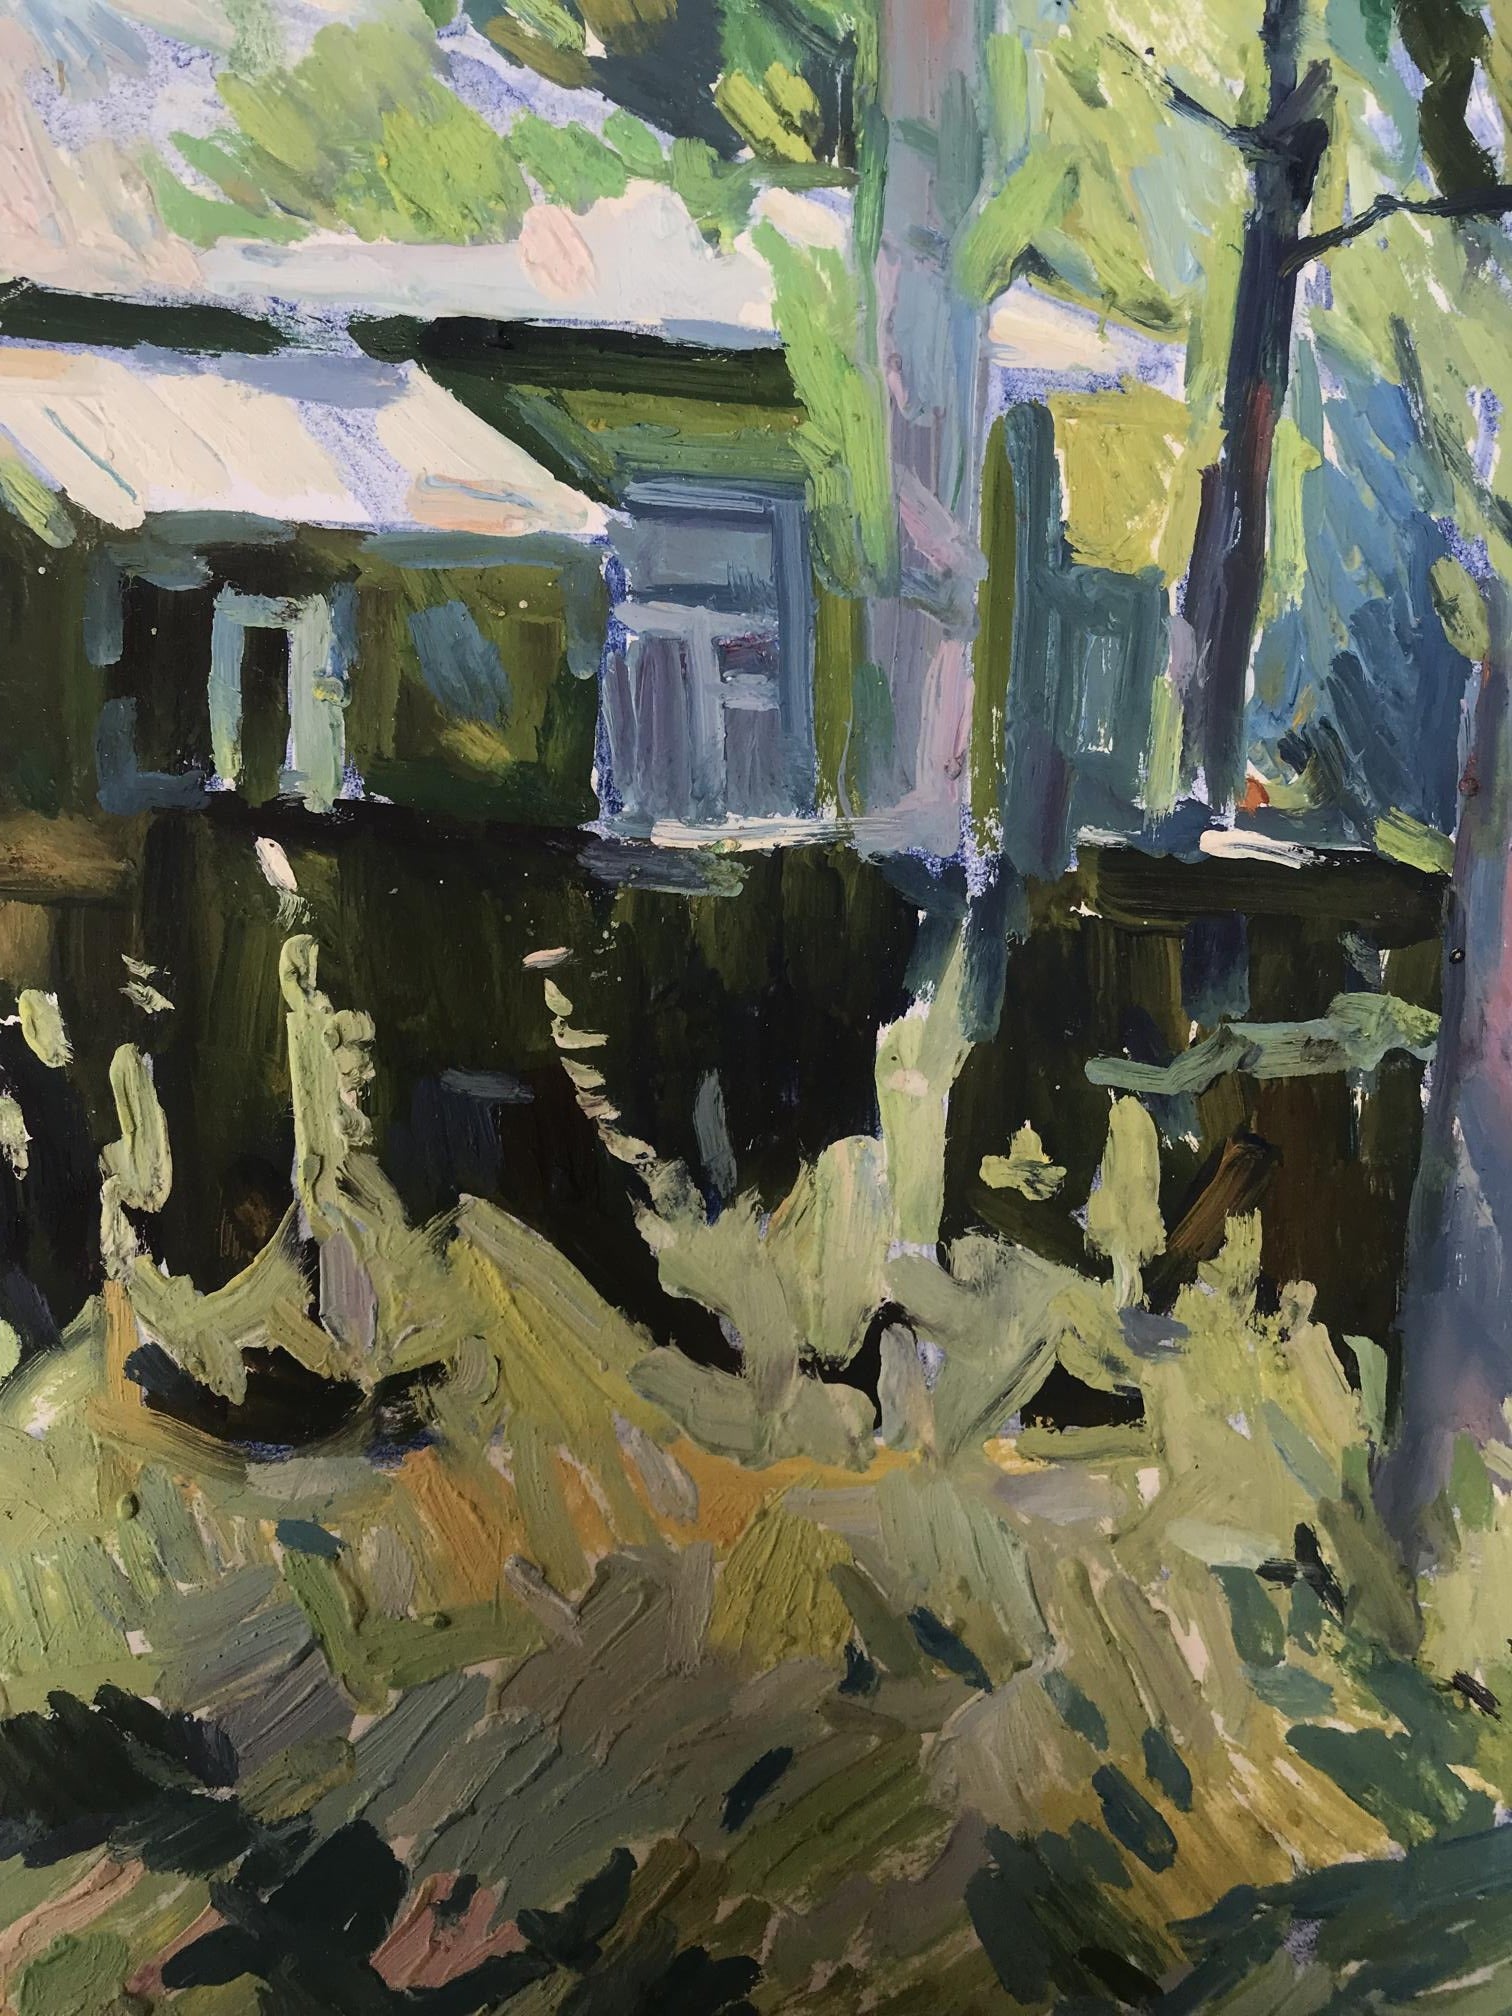 Oil painting by Peter Dobrev: "House in the Forest"